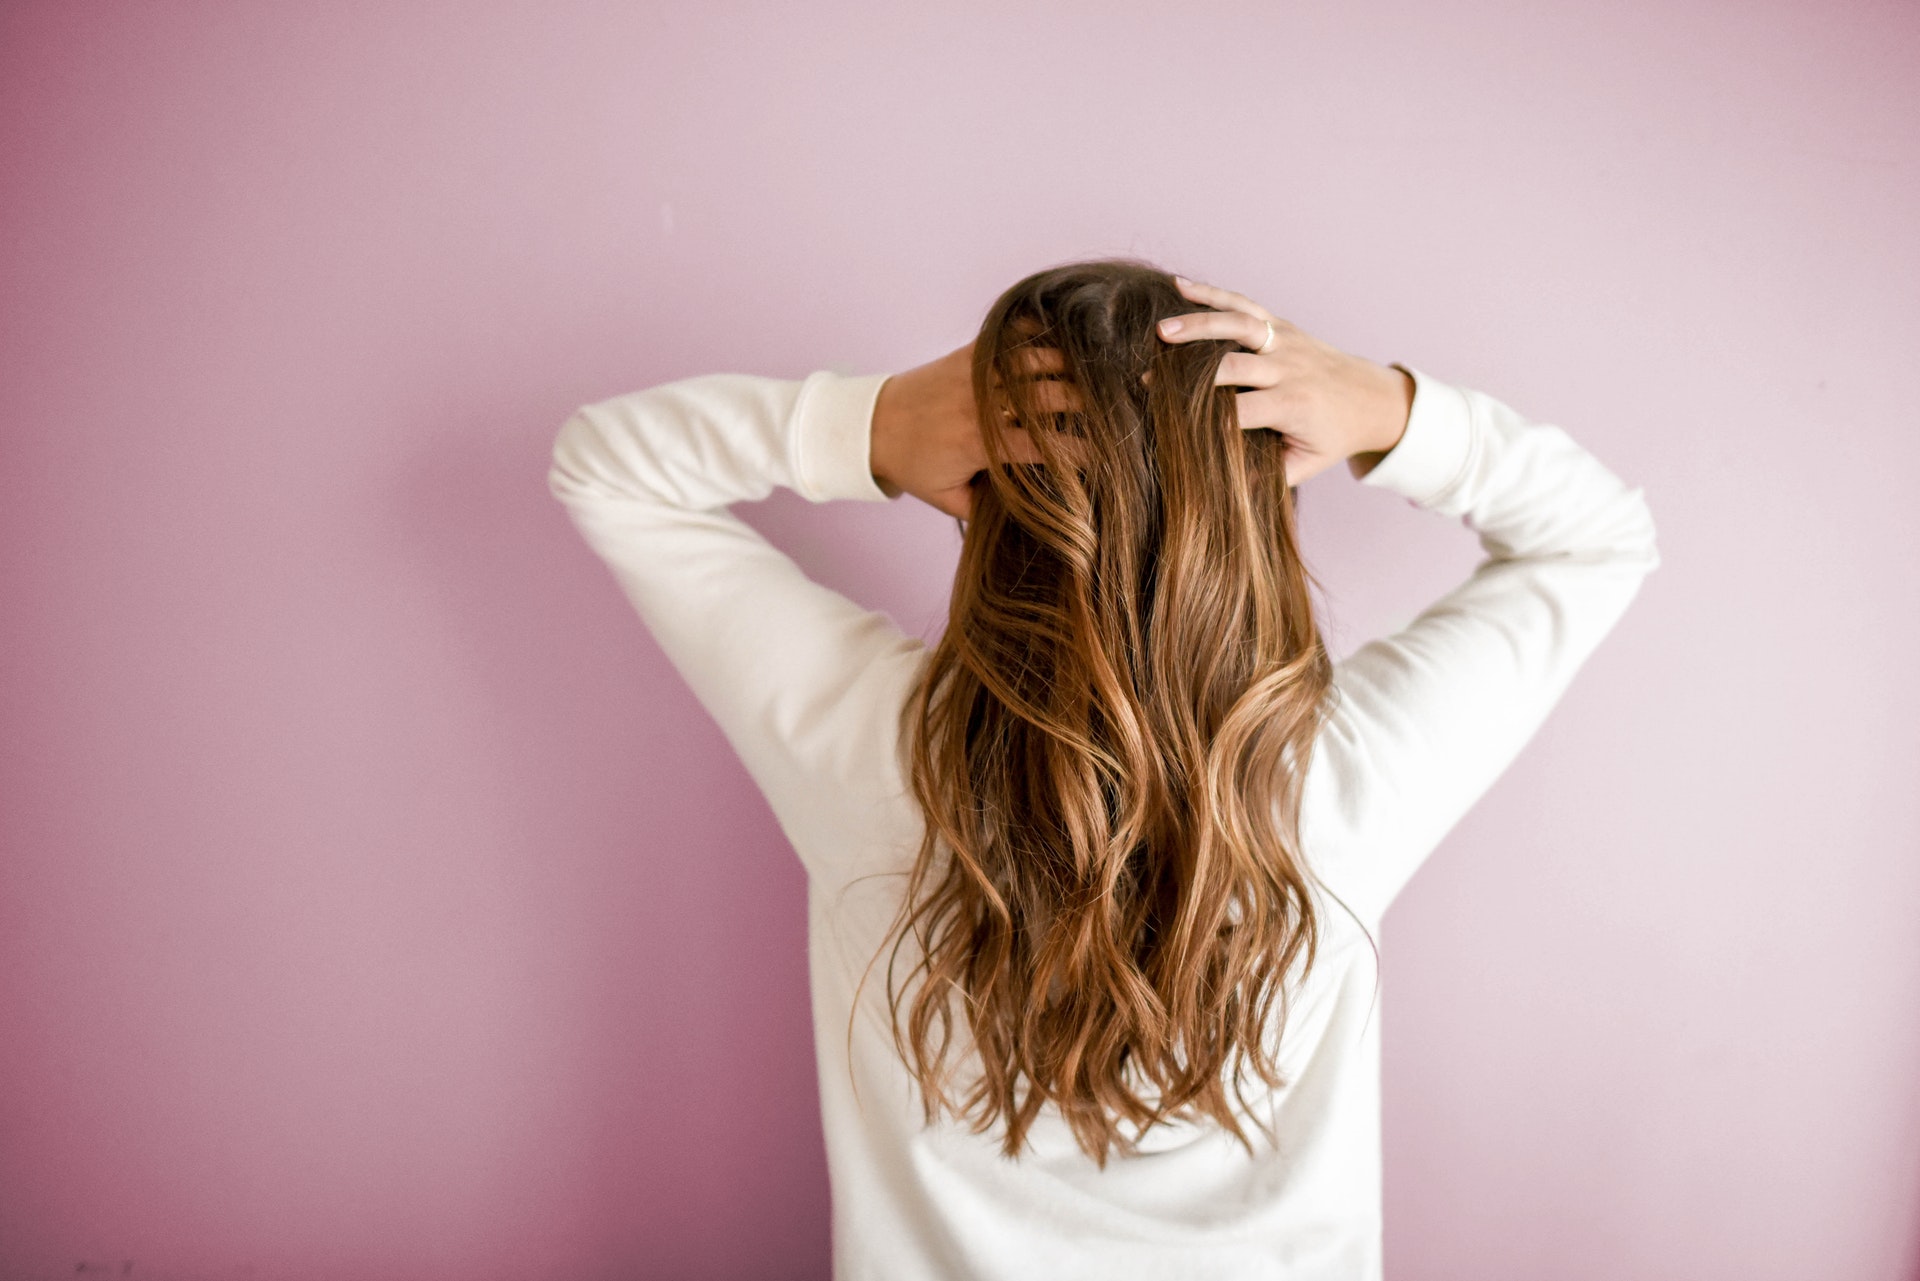 Postpartum hair loss: What to expect - Mums At The Table